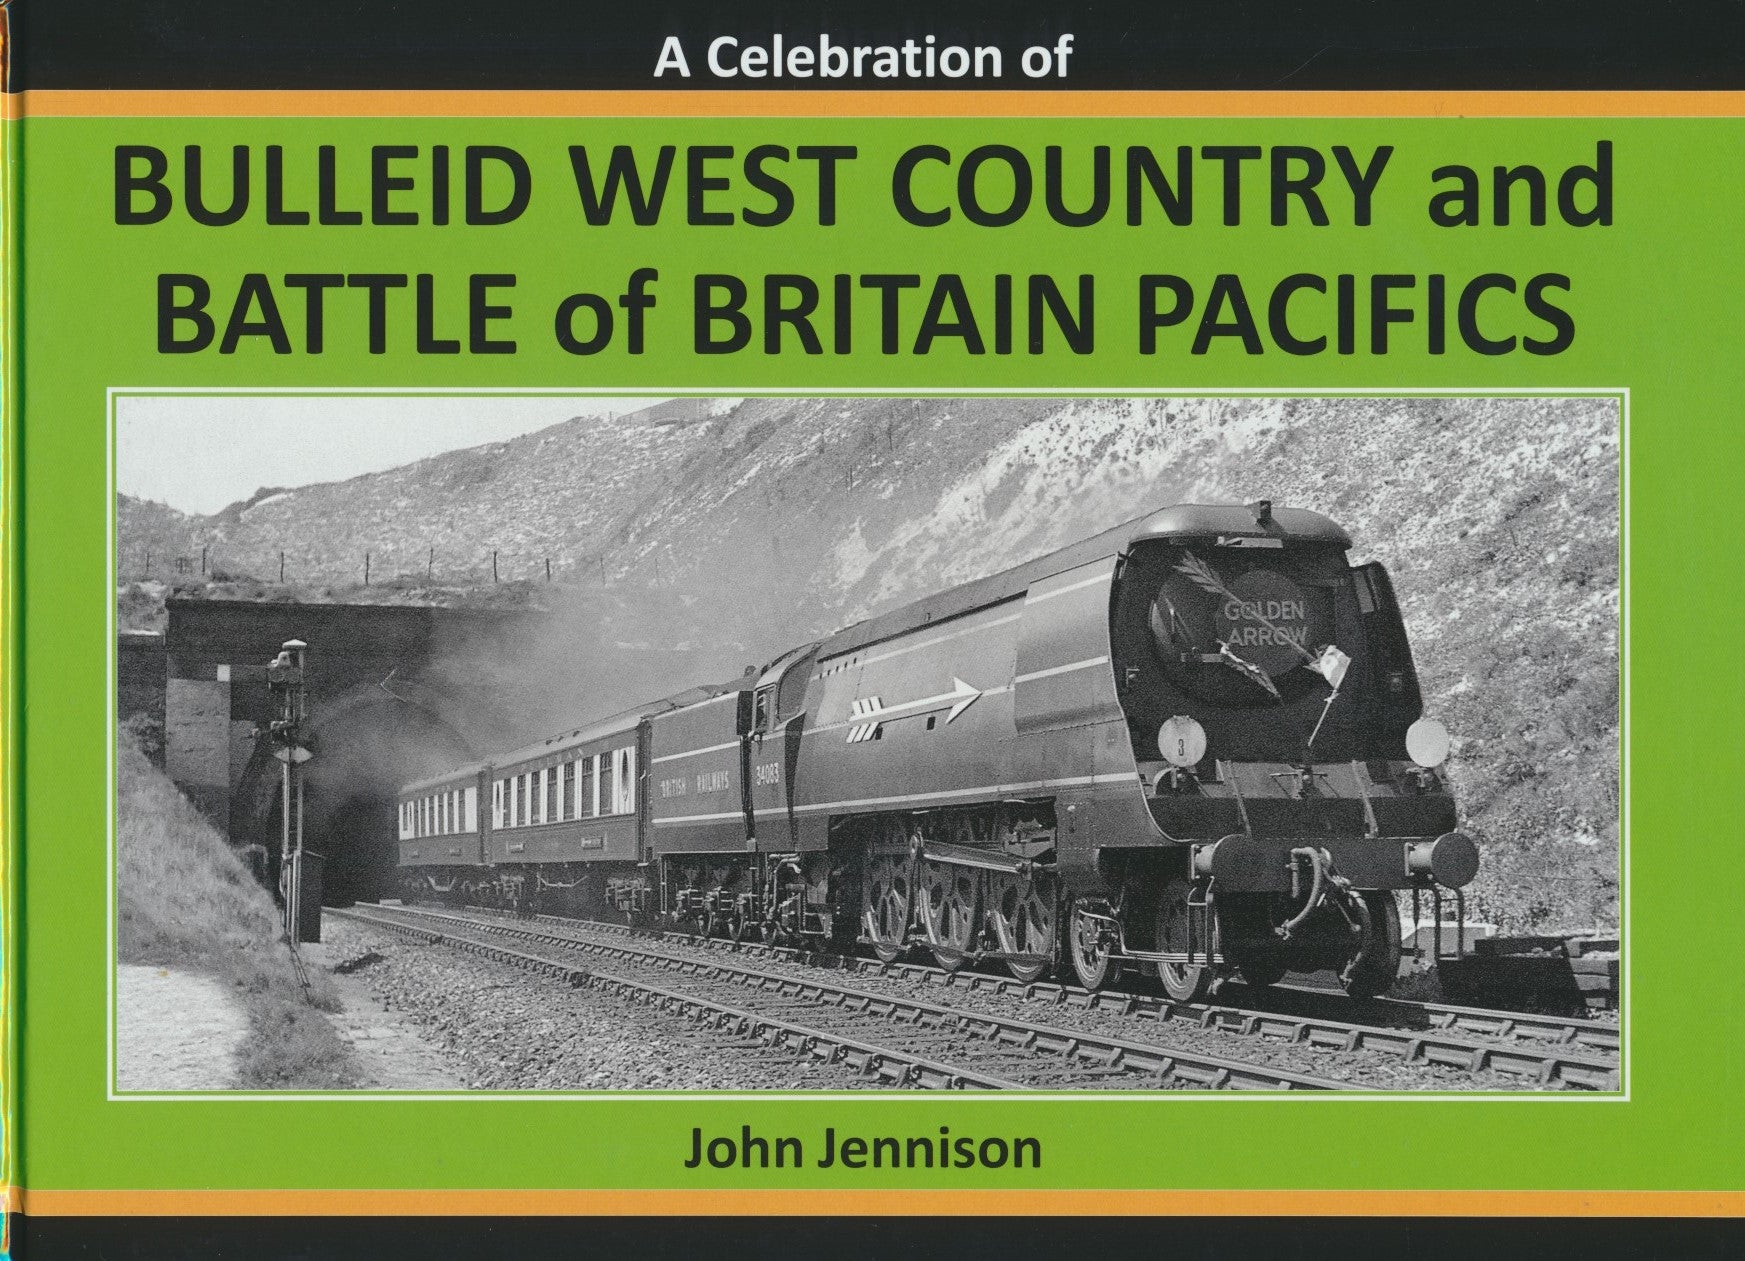 A Celebration of Bulleid West Country and Battle of Britain Pacifics